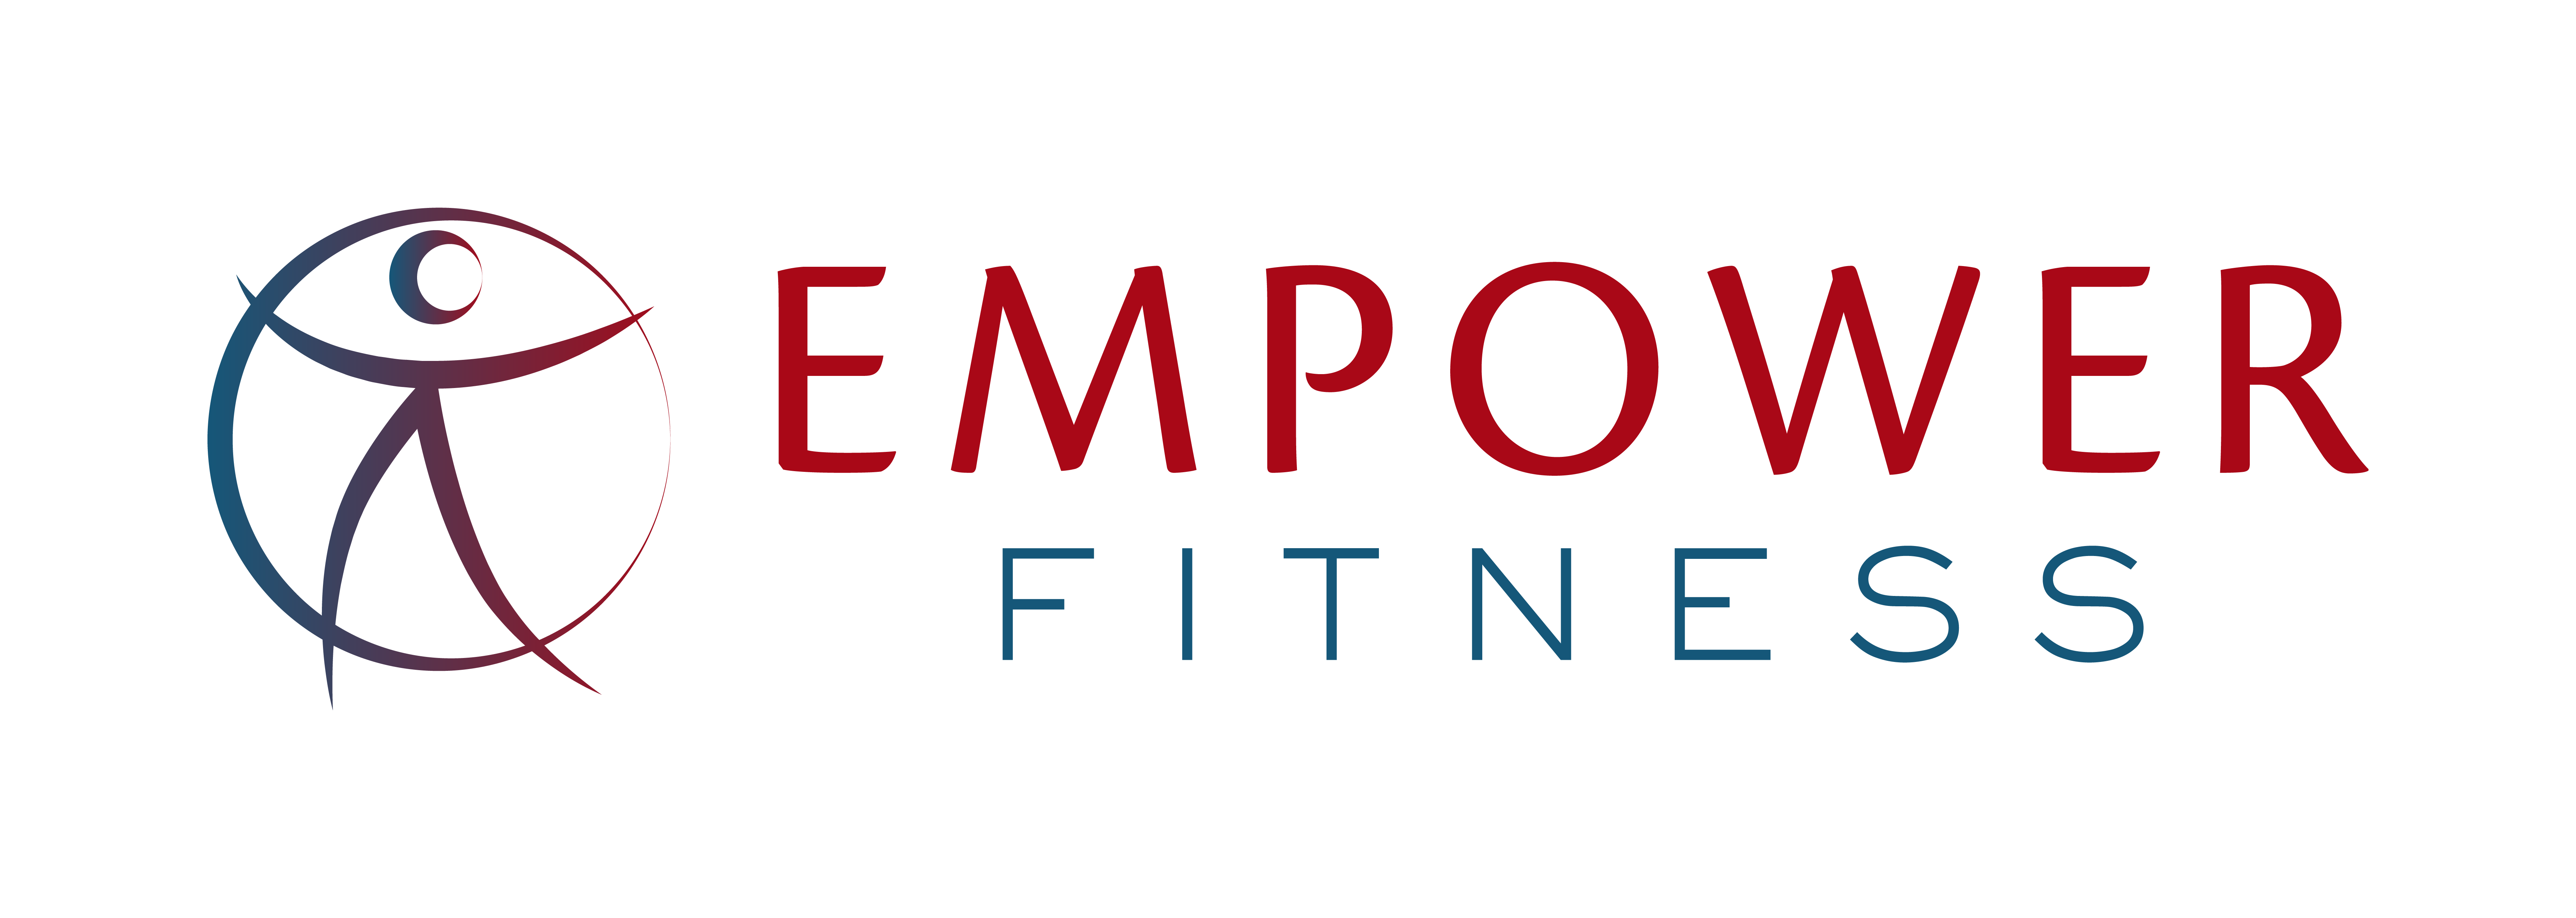 Empower FitnessHealthy lifestyle coaching anywhere anytime